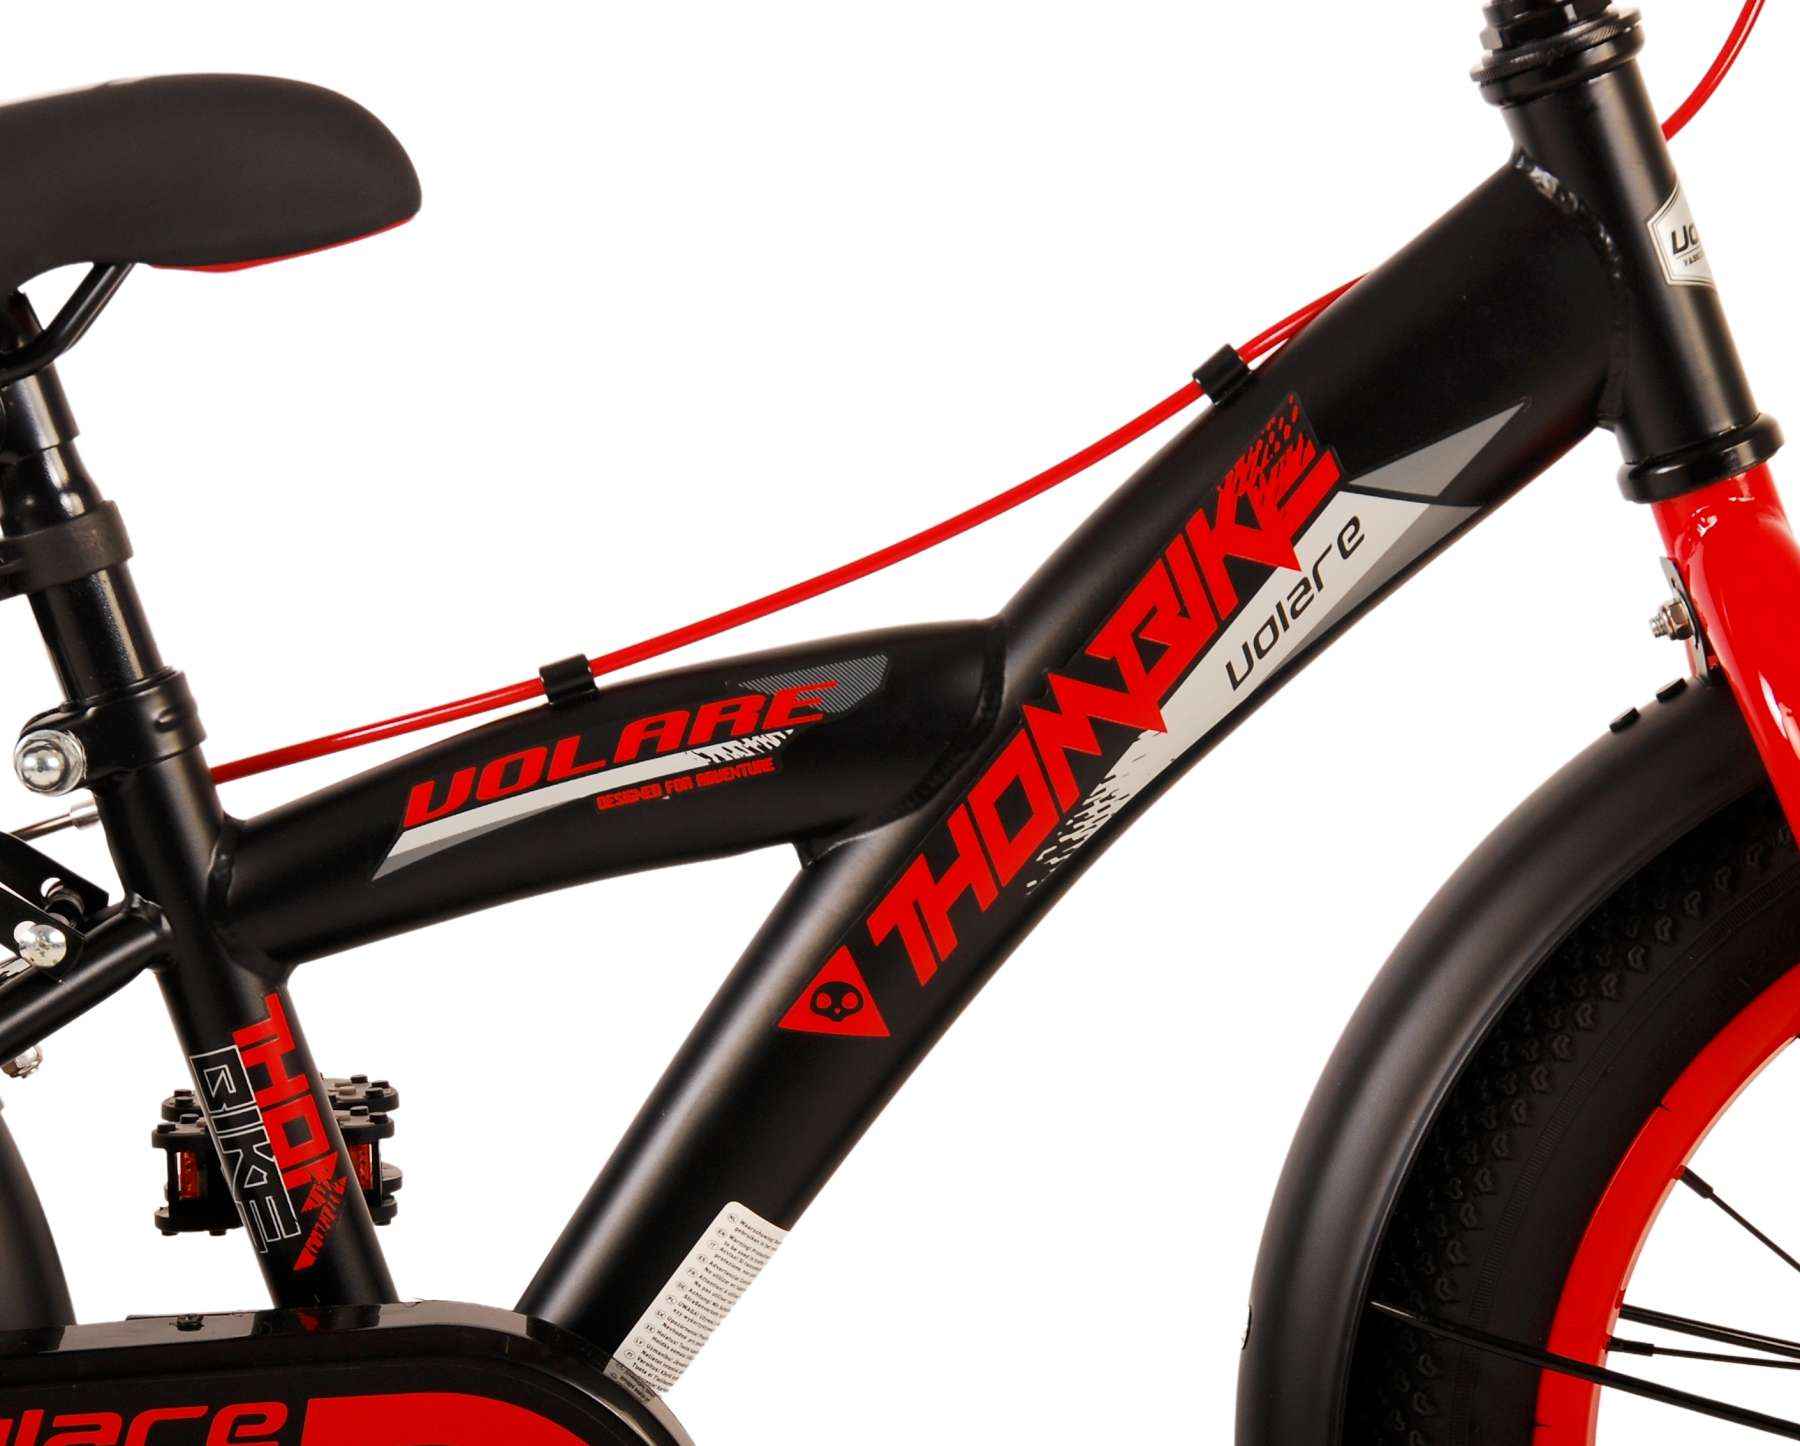 Thombike_16_inch_Rood_-_6-W1800